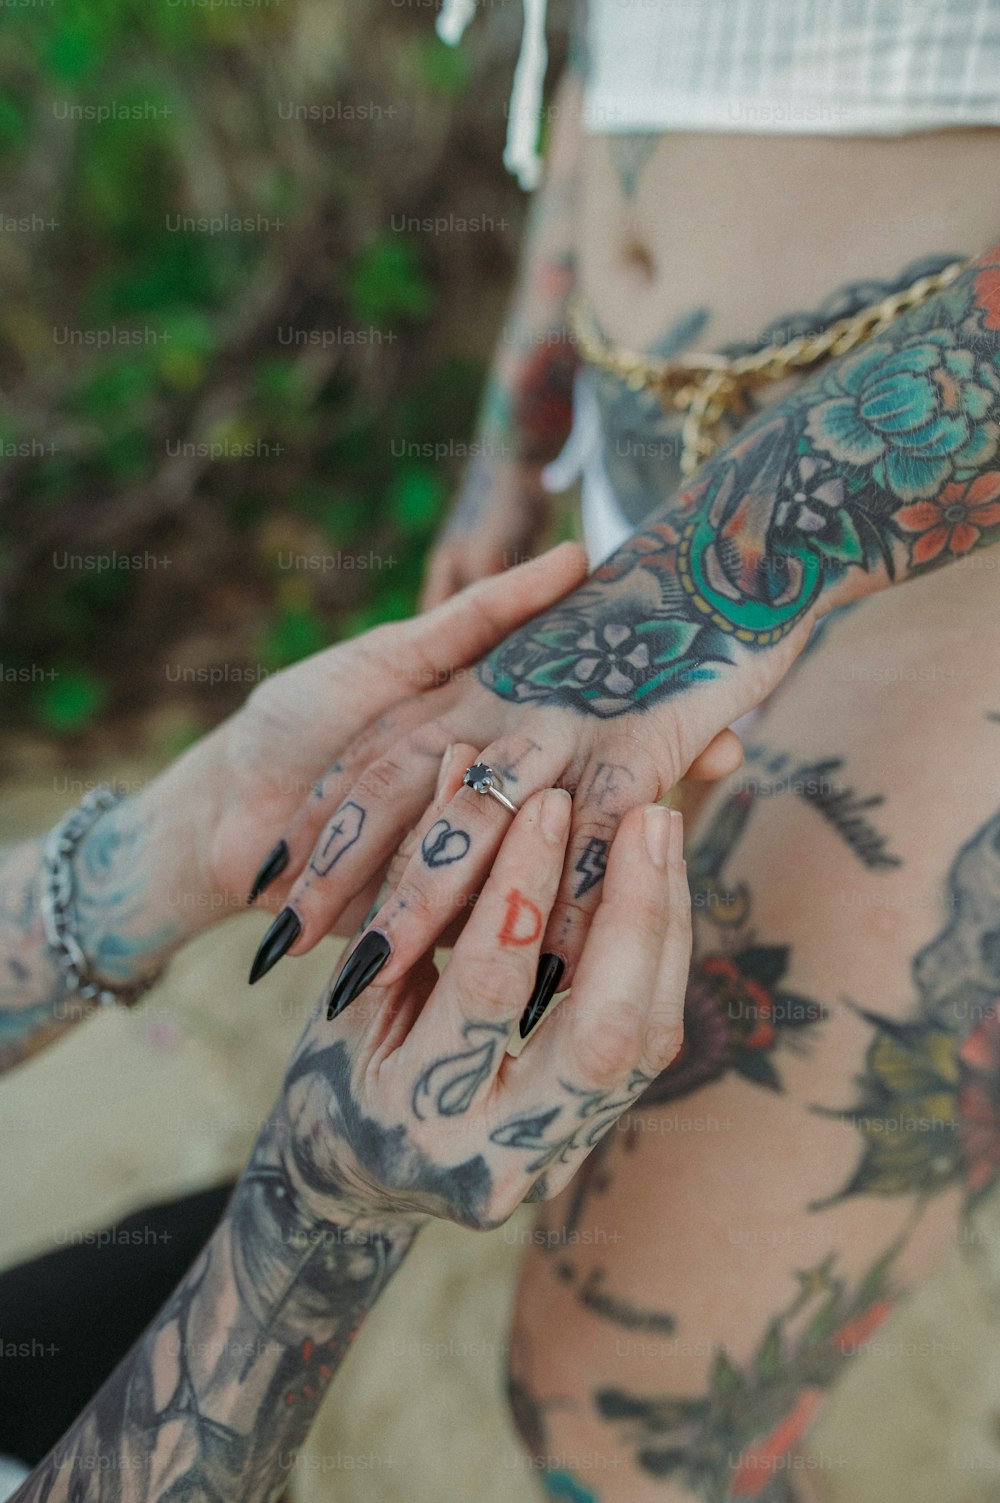 a woman with tattoos on her body holding her hand